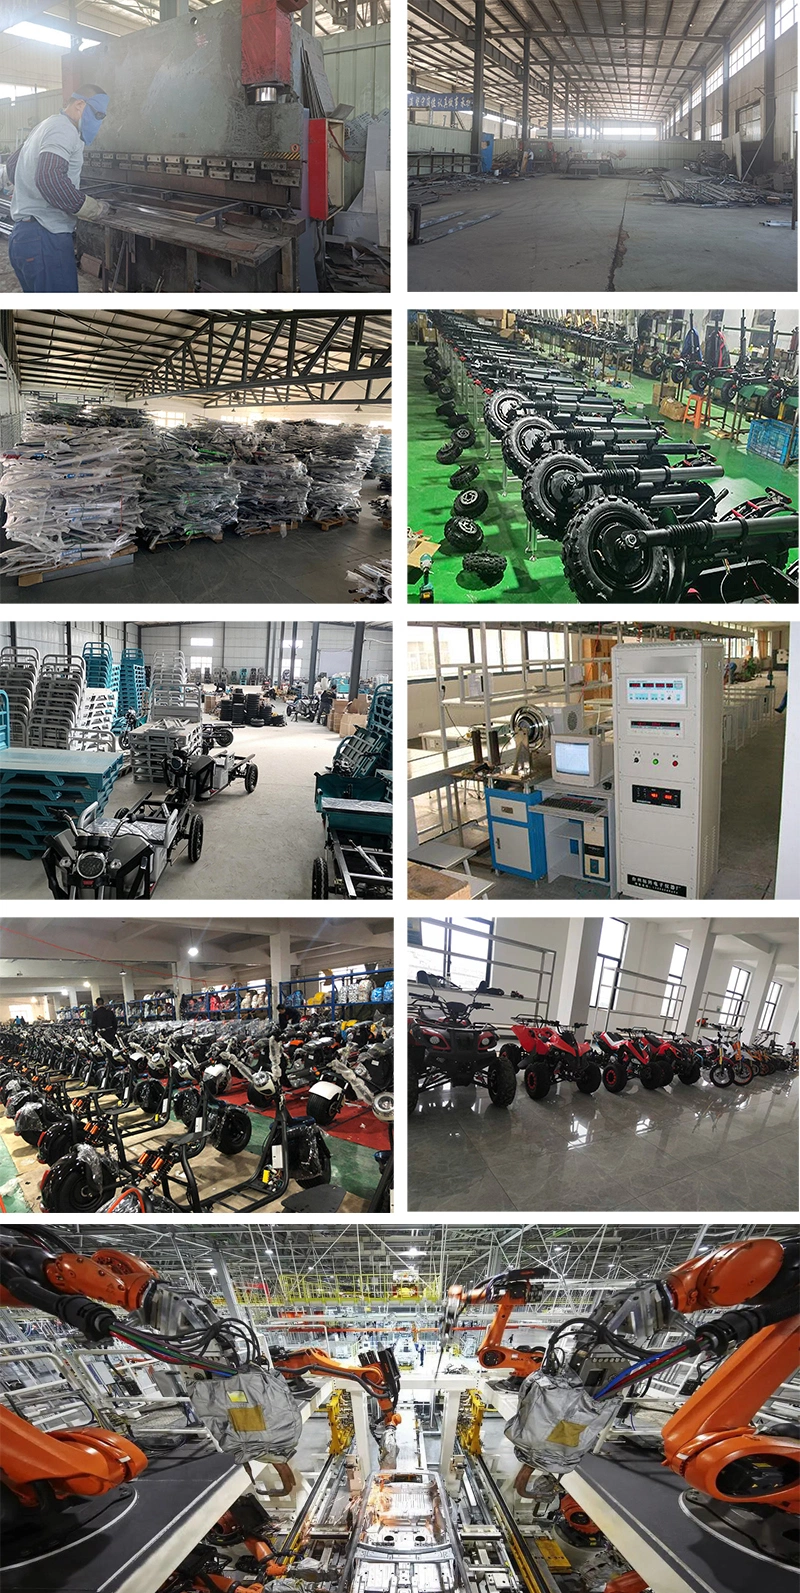 Motorcycle Japanese Electrical Price in Malaysia Mini Mexico 3wheel Electric-Bicycle-Dropship 100kmh 5000 W 5 Electric Bicycle